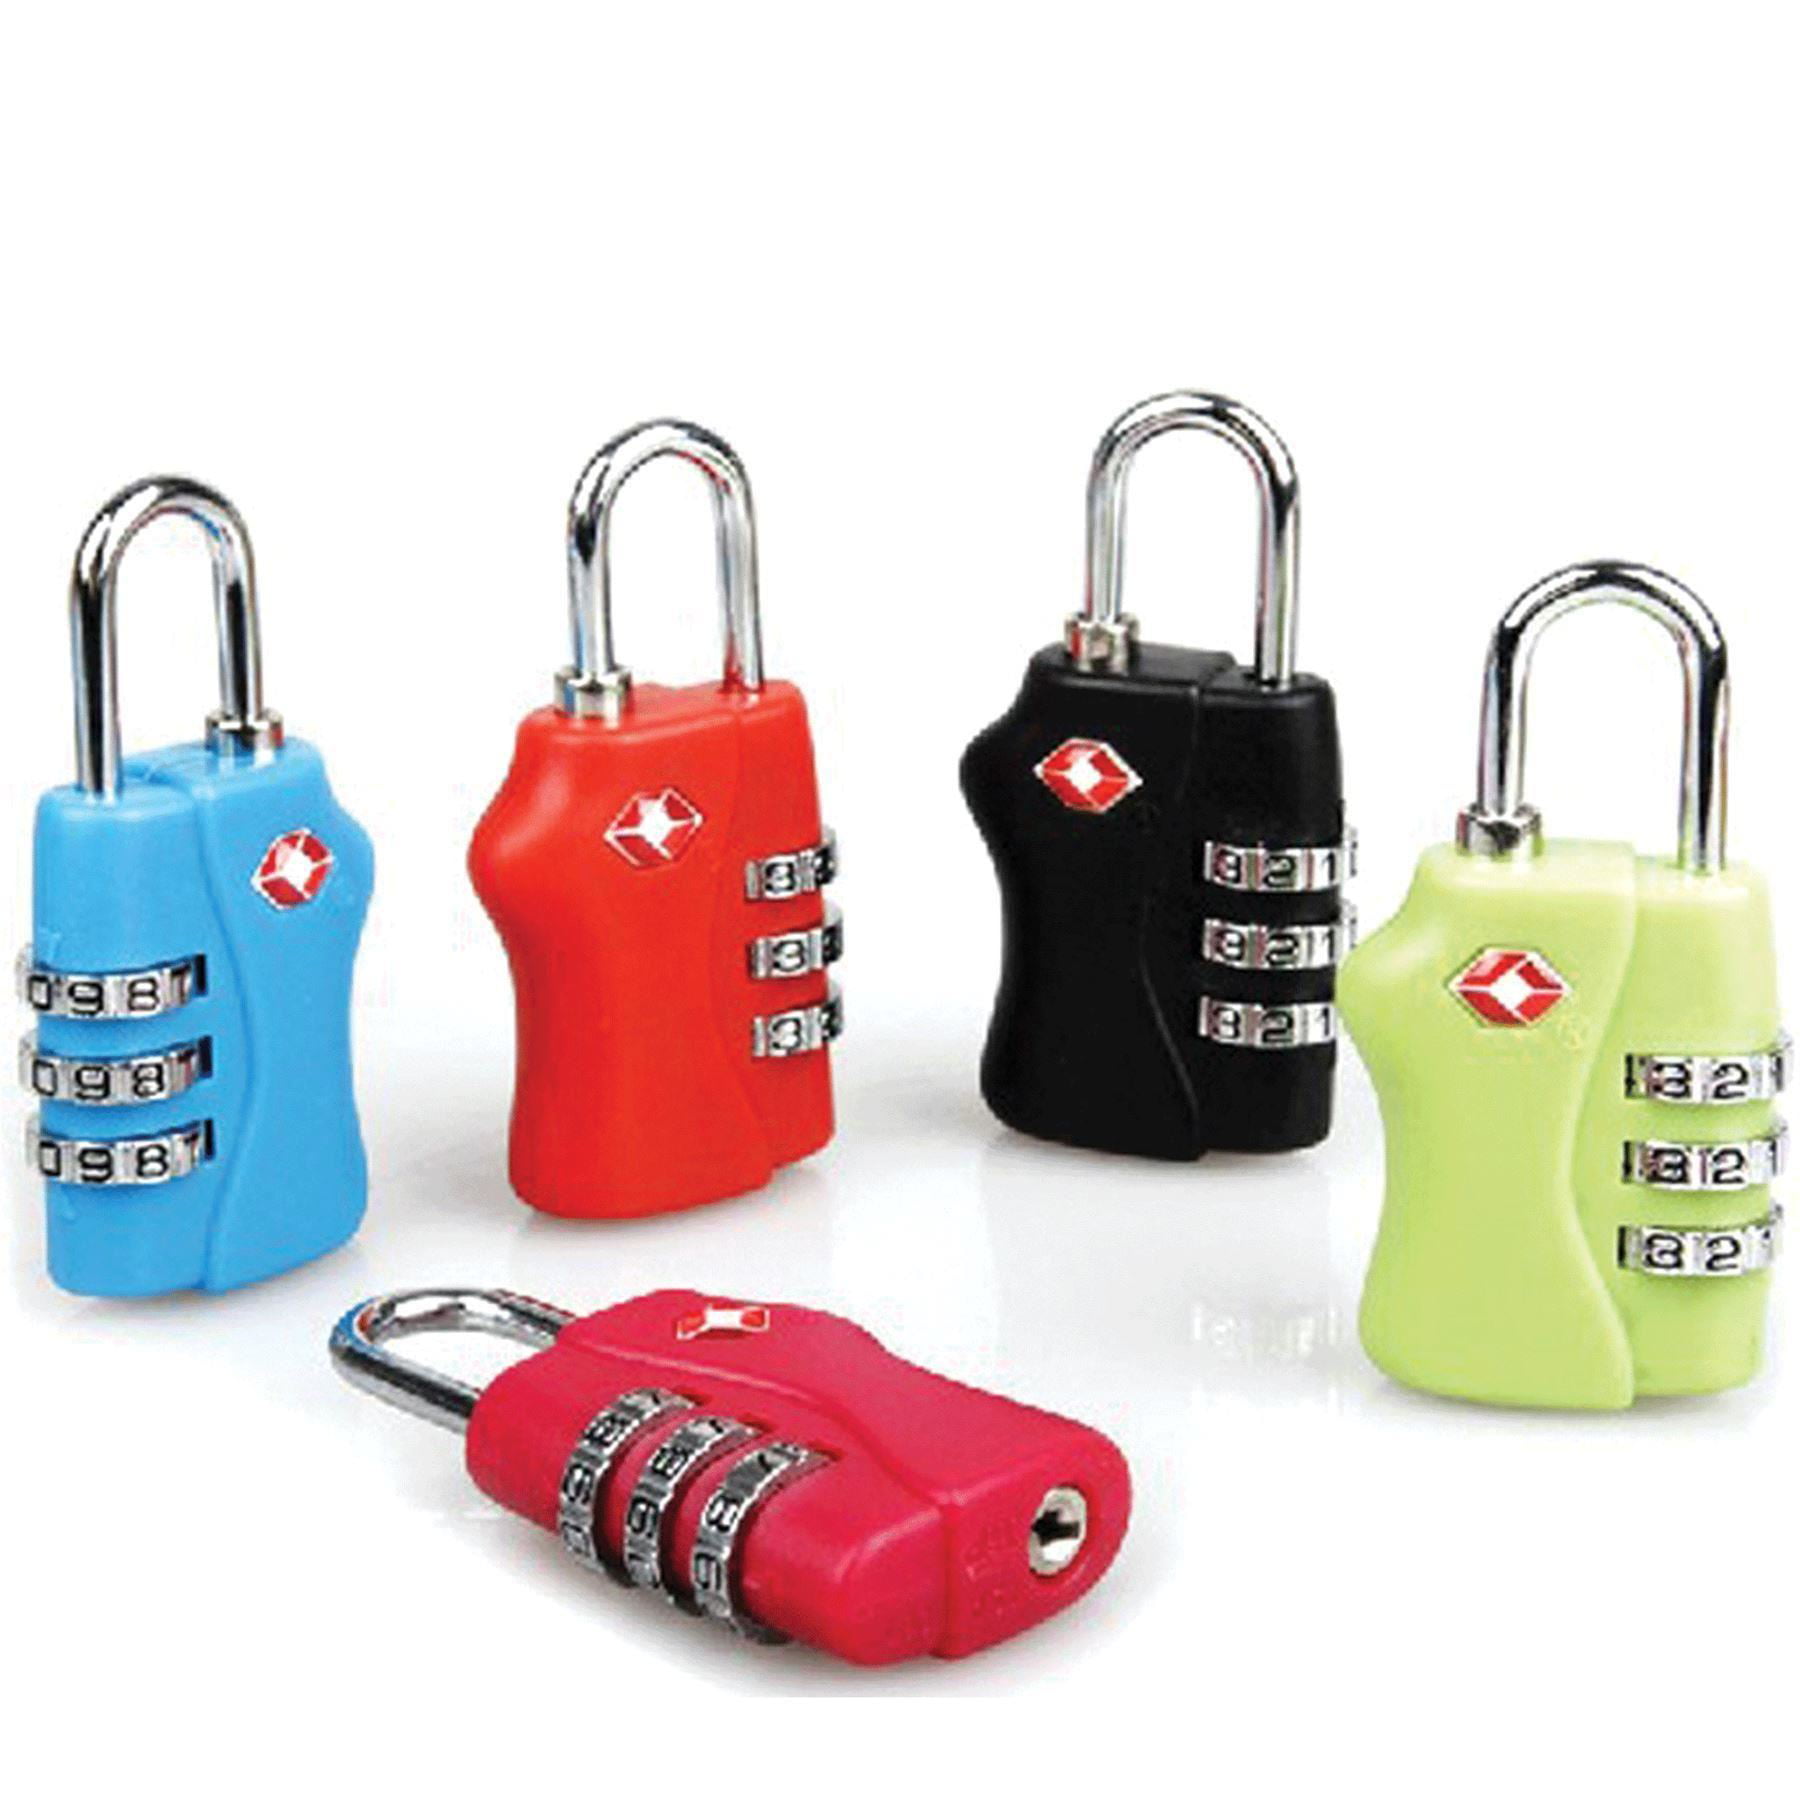 Luggage Suitcase Travel Security Lock 3 Digit Combine For TSA PP F Z0 ed 